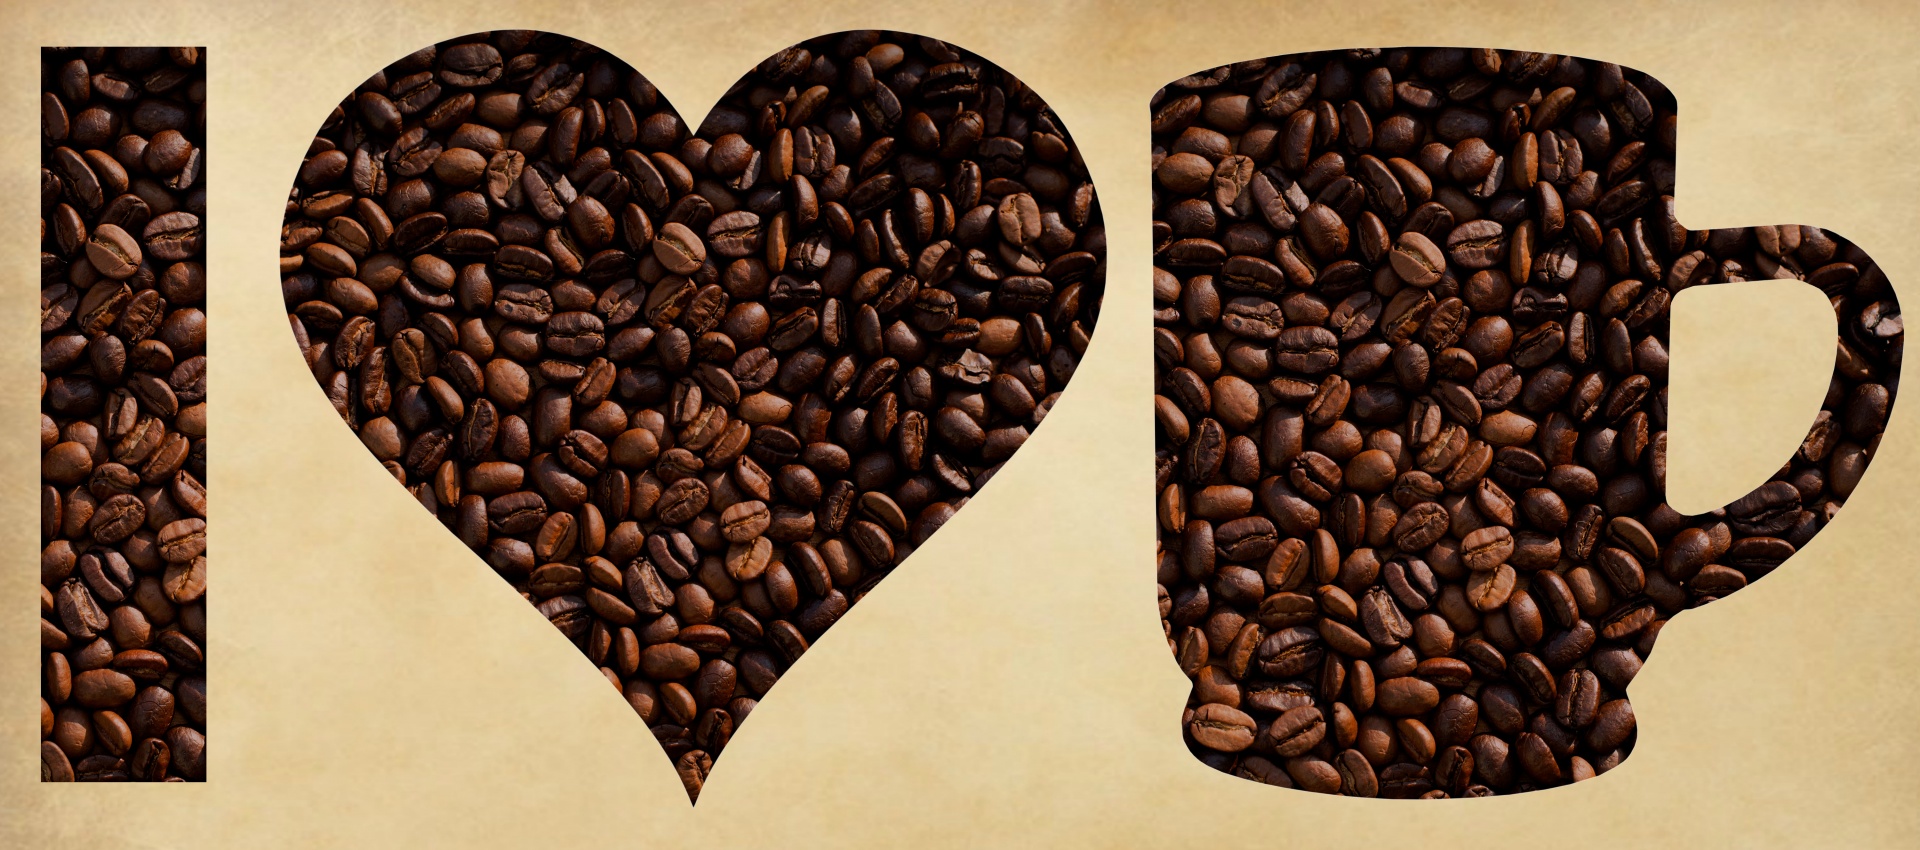 Image of Coffee beans in the shape of the letter I and a heart shape and cup shape